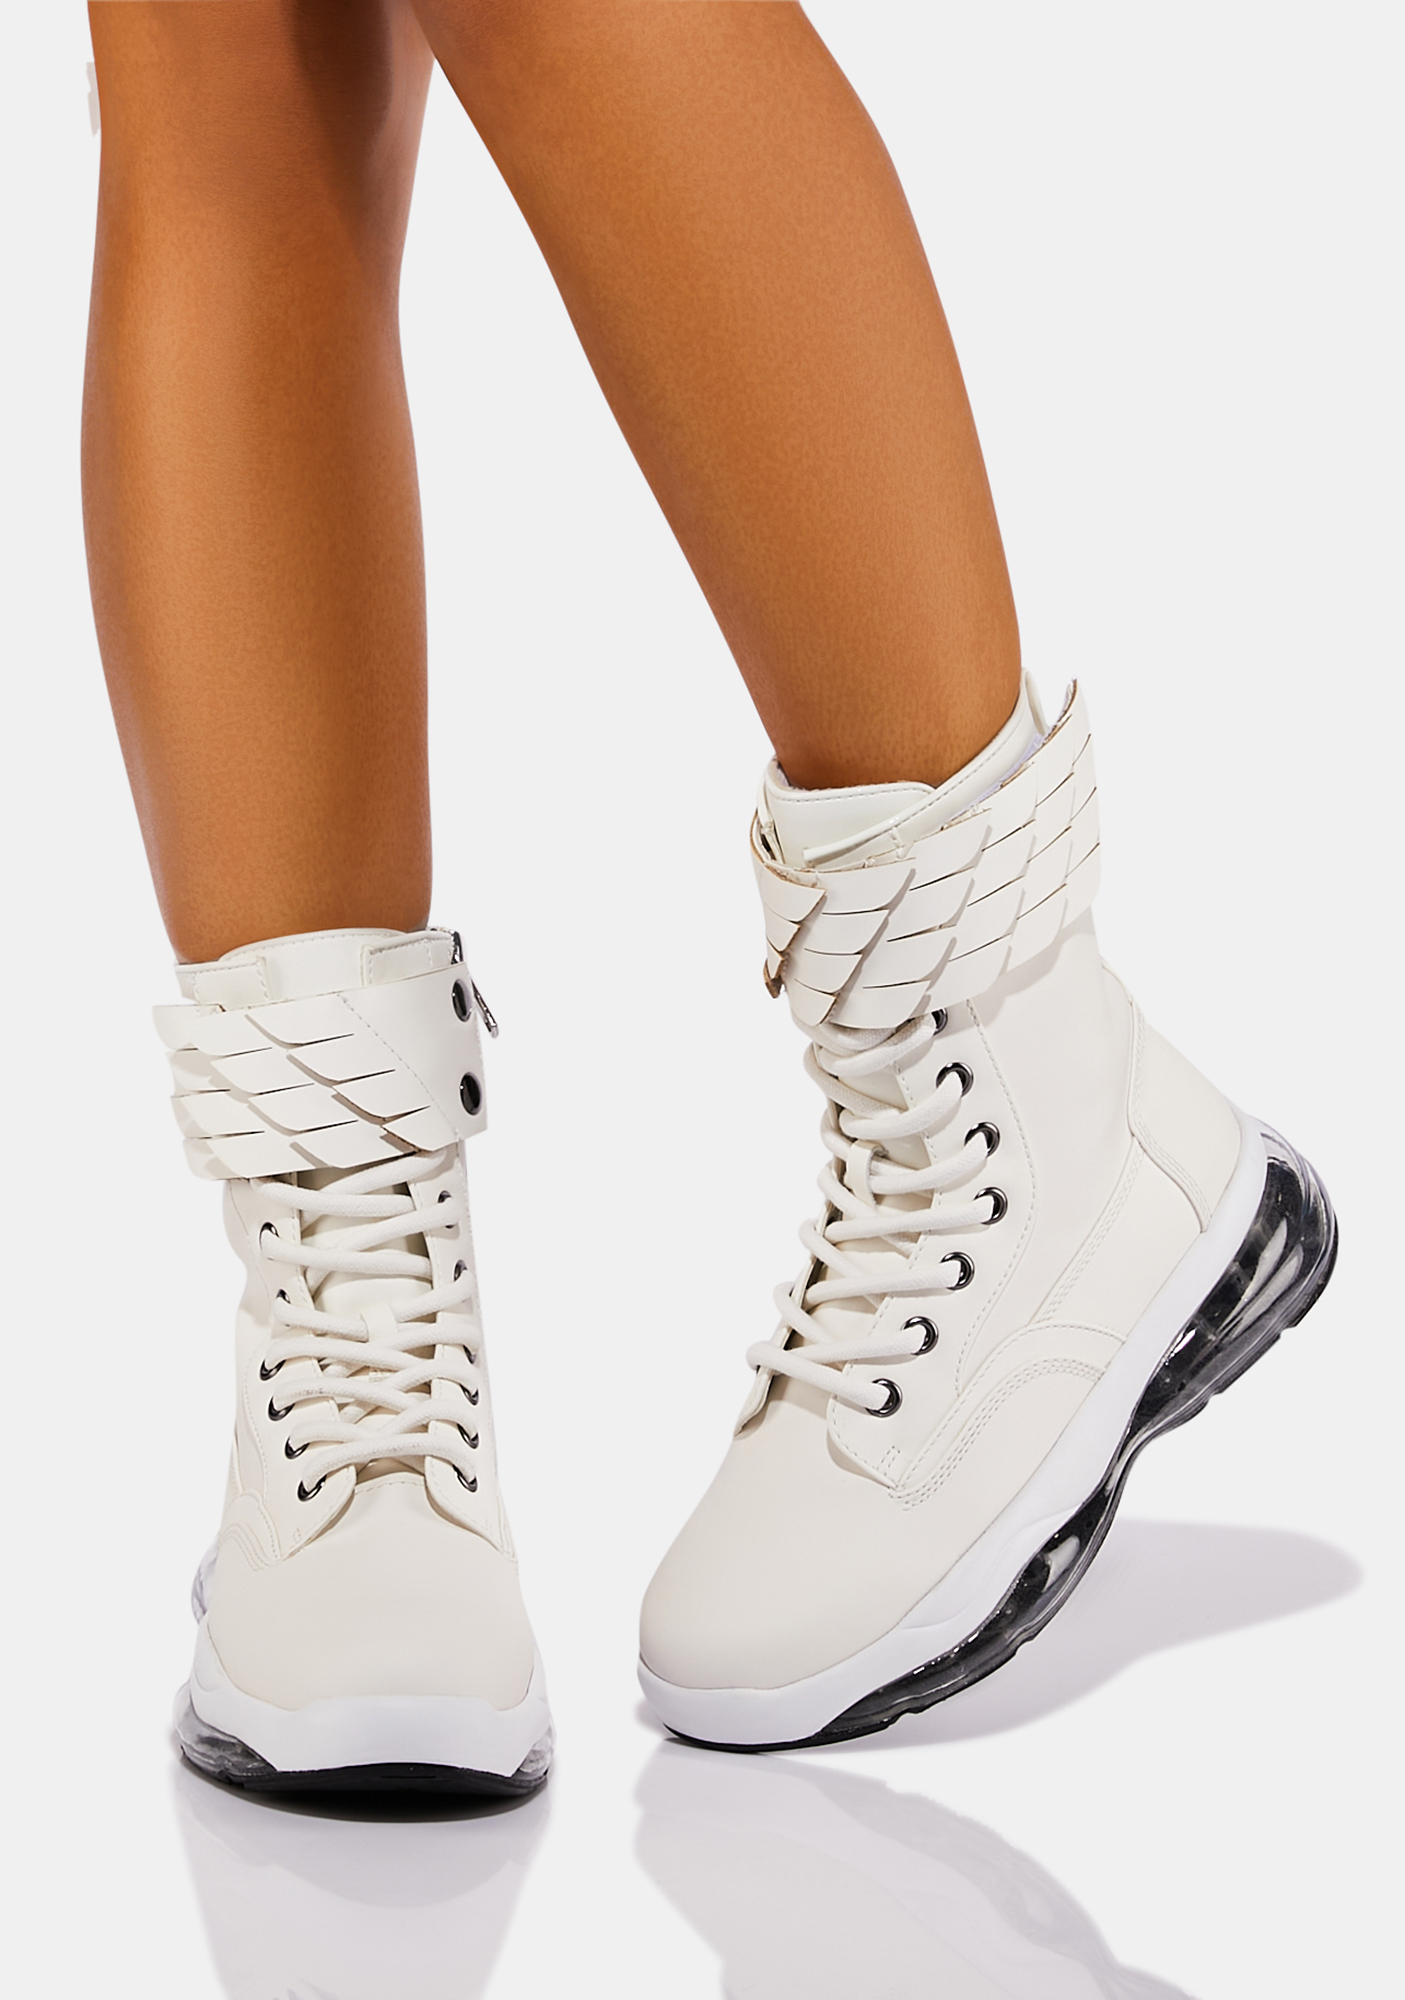 Esqape Color Changing UV Winged Rubber Sole Boots | Dolls Kill